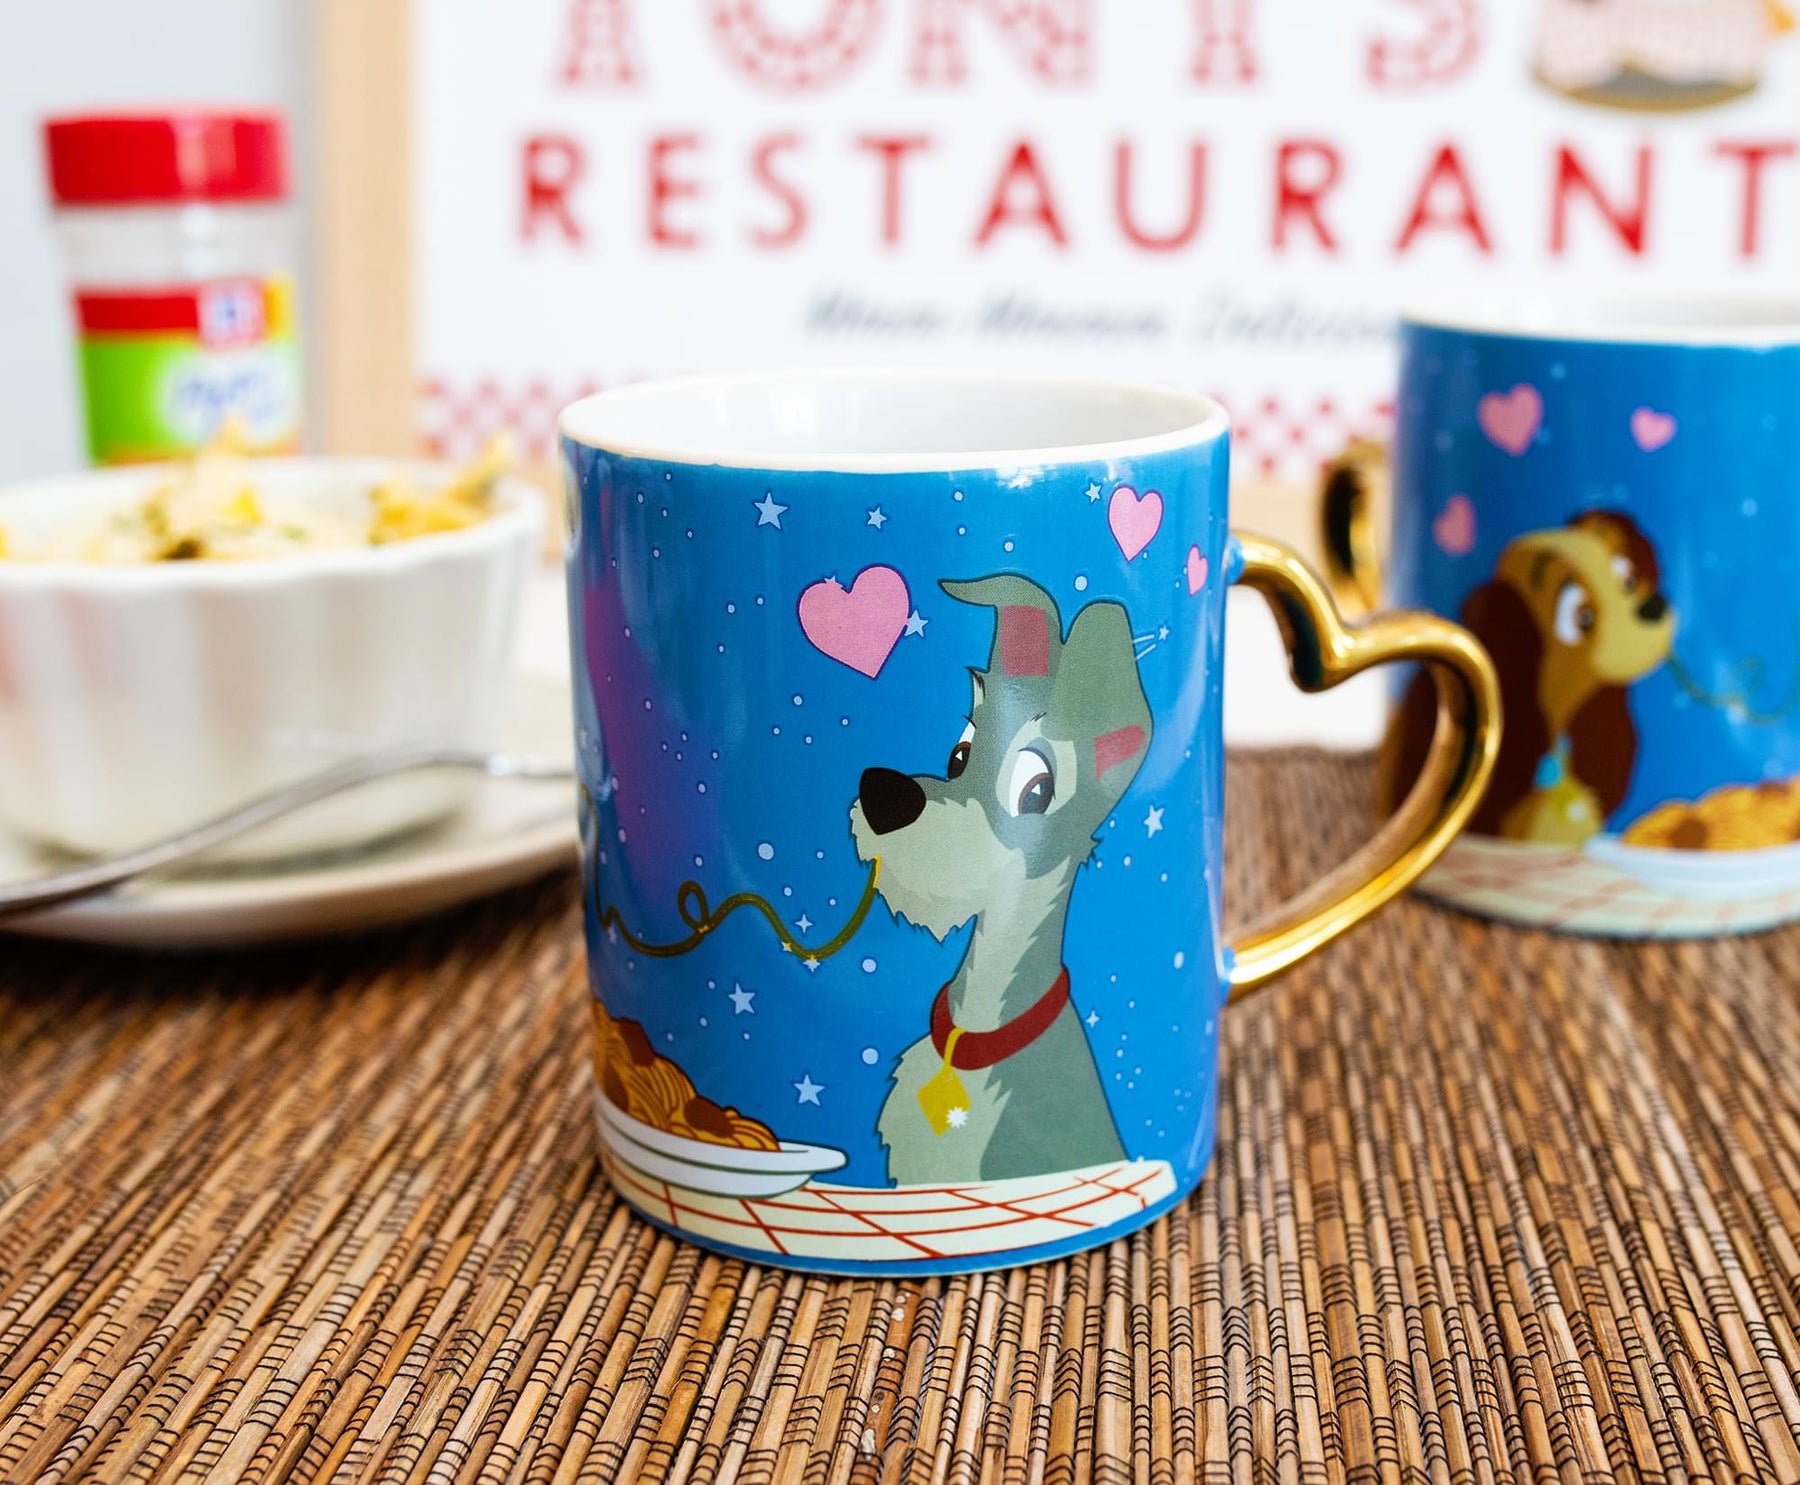 Disney Lady and the Tramp 14-Ounce Heart-Shaped Handle Ceramic Mugs | Set of 2